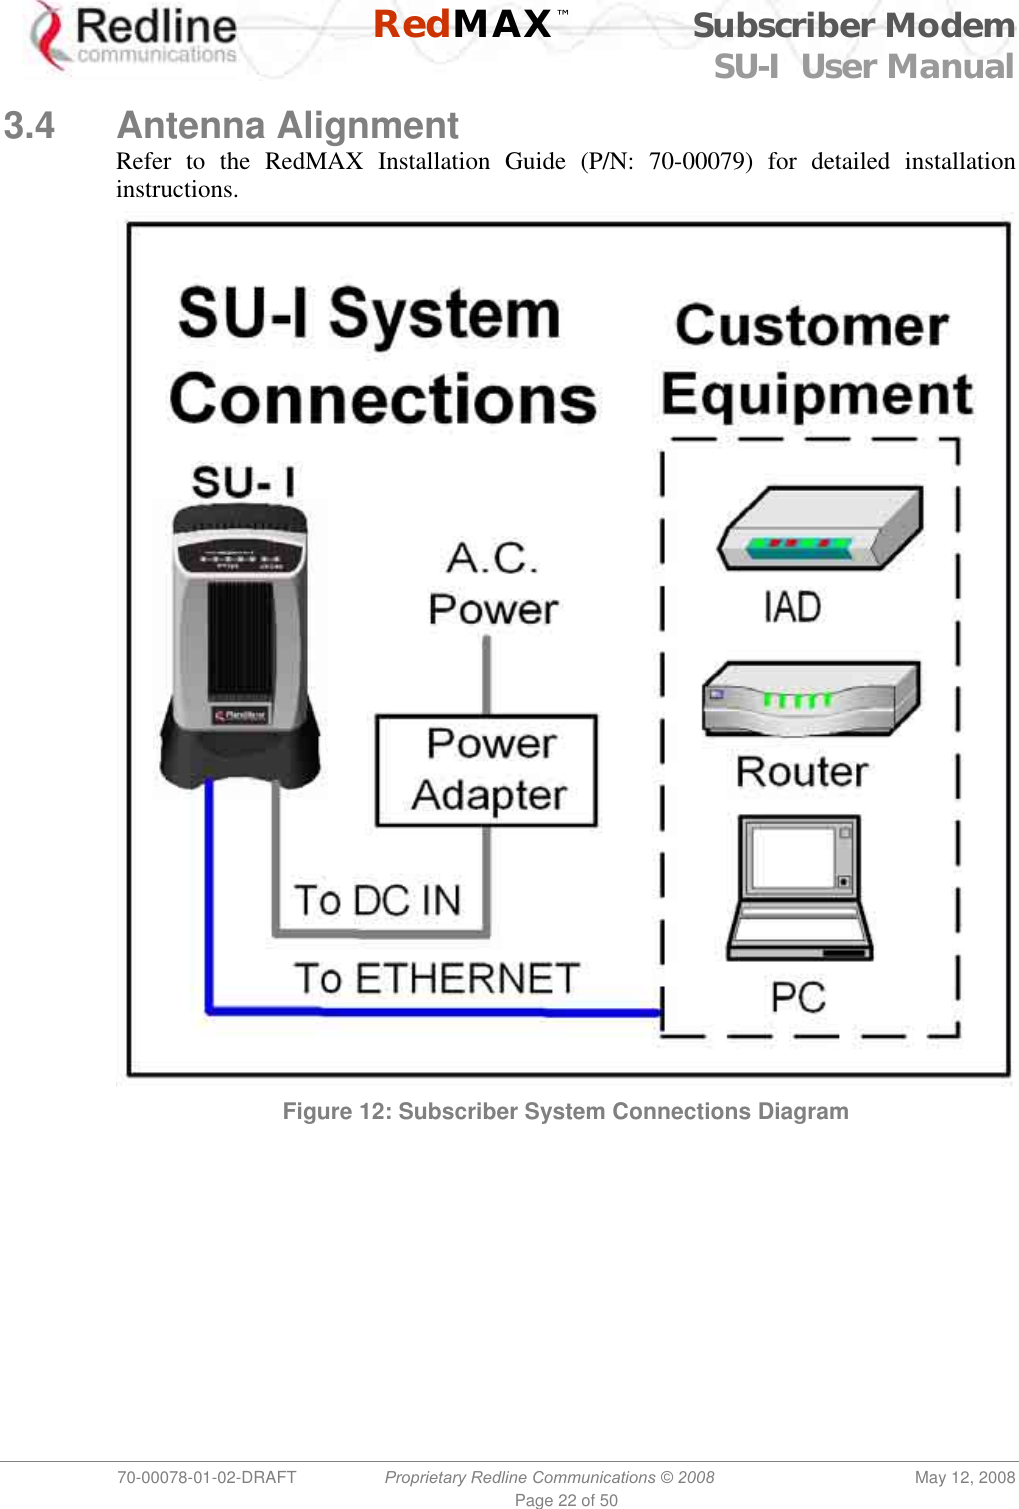    RedMAX™ Subscriber Modem SU-I  User Manual  70-00078-01-02-DRAFT  Proprietary Redline Communications © 2008  May 12, 2008 Page 22 of 50  3.4 Antenna Alignment Refer to the RedMAX Installation Guide (P/N: 70-00079) for detailed installation instructions.  Figure 12: Subscriber System Connections Diagram 